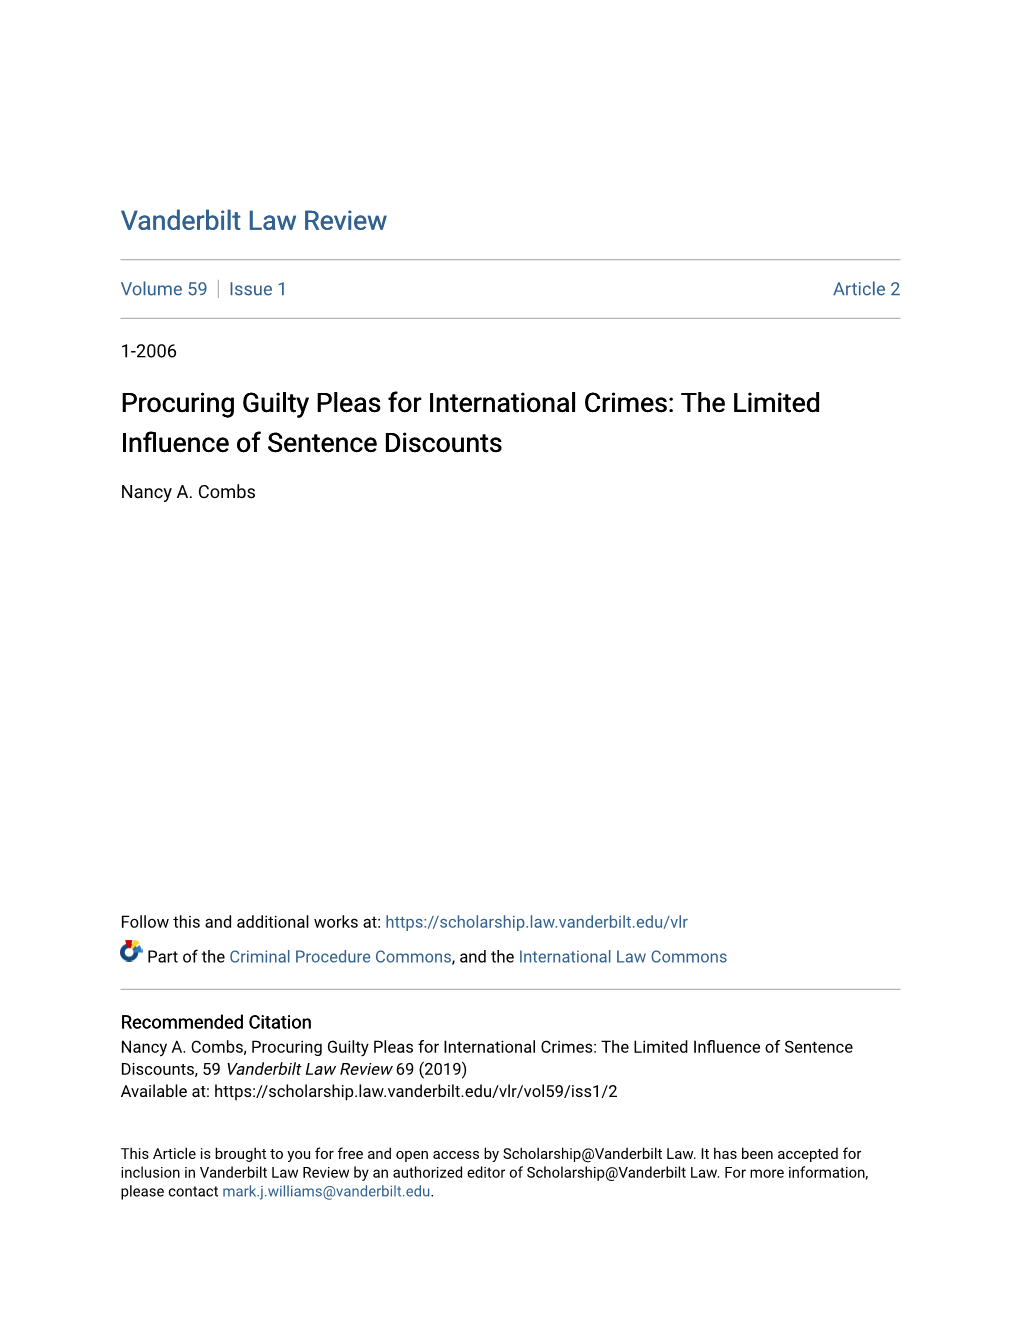 Procuring Guilty Pleas for International Crimes: the Limited Influence of Sentence Discounts